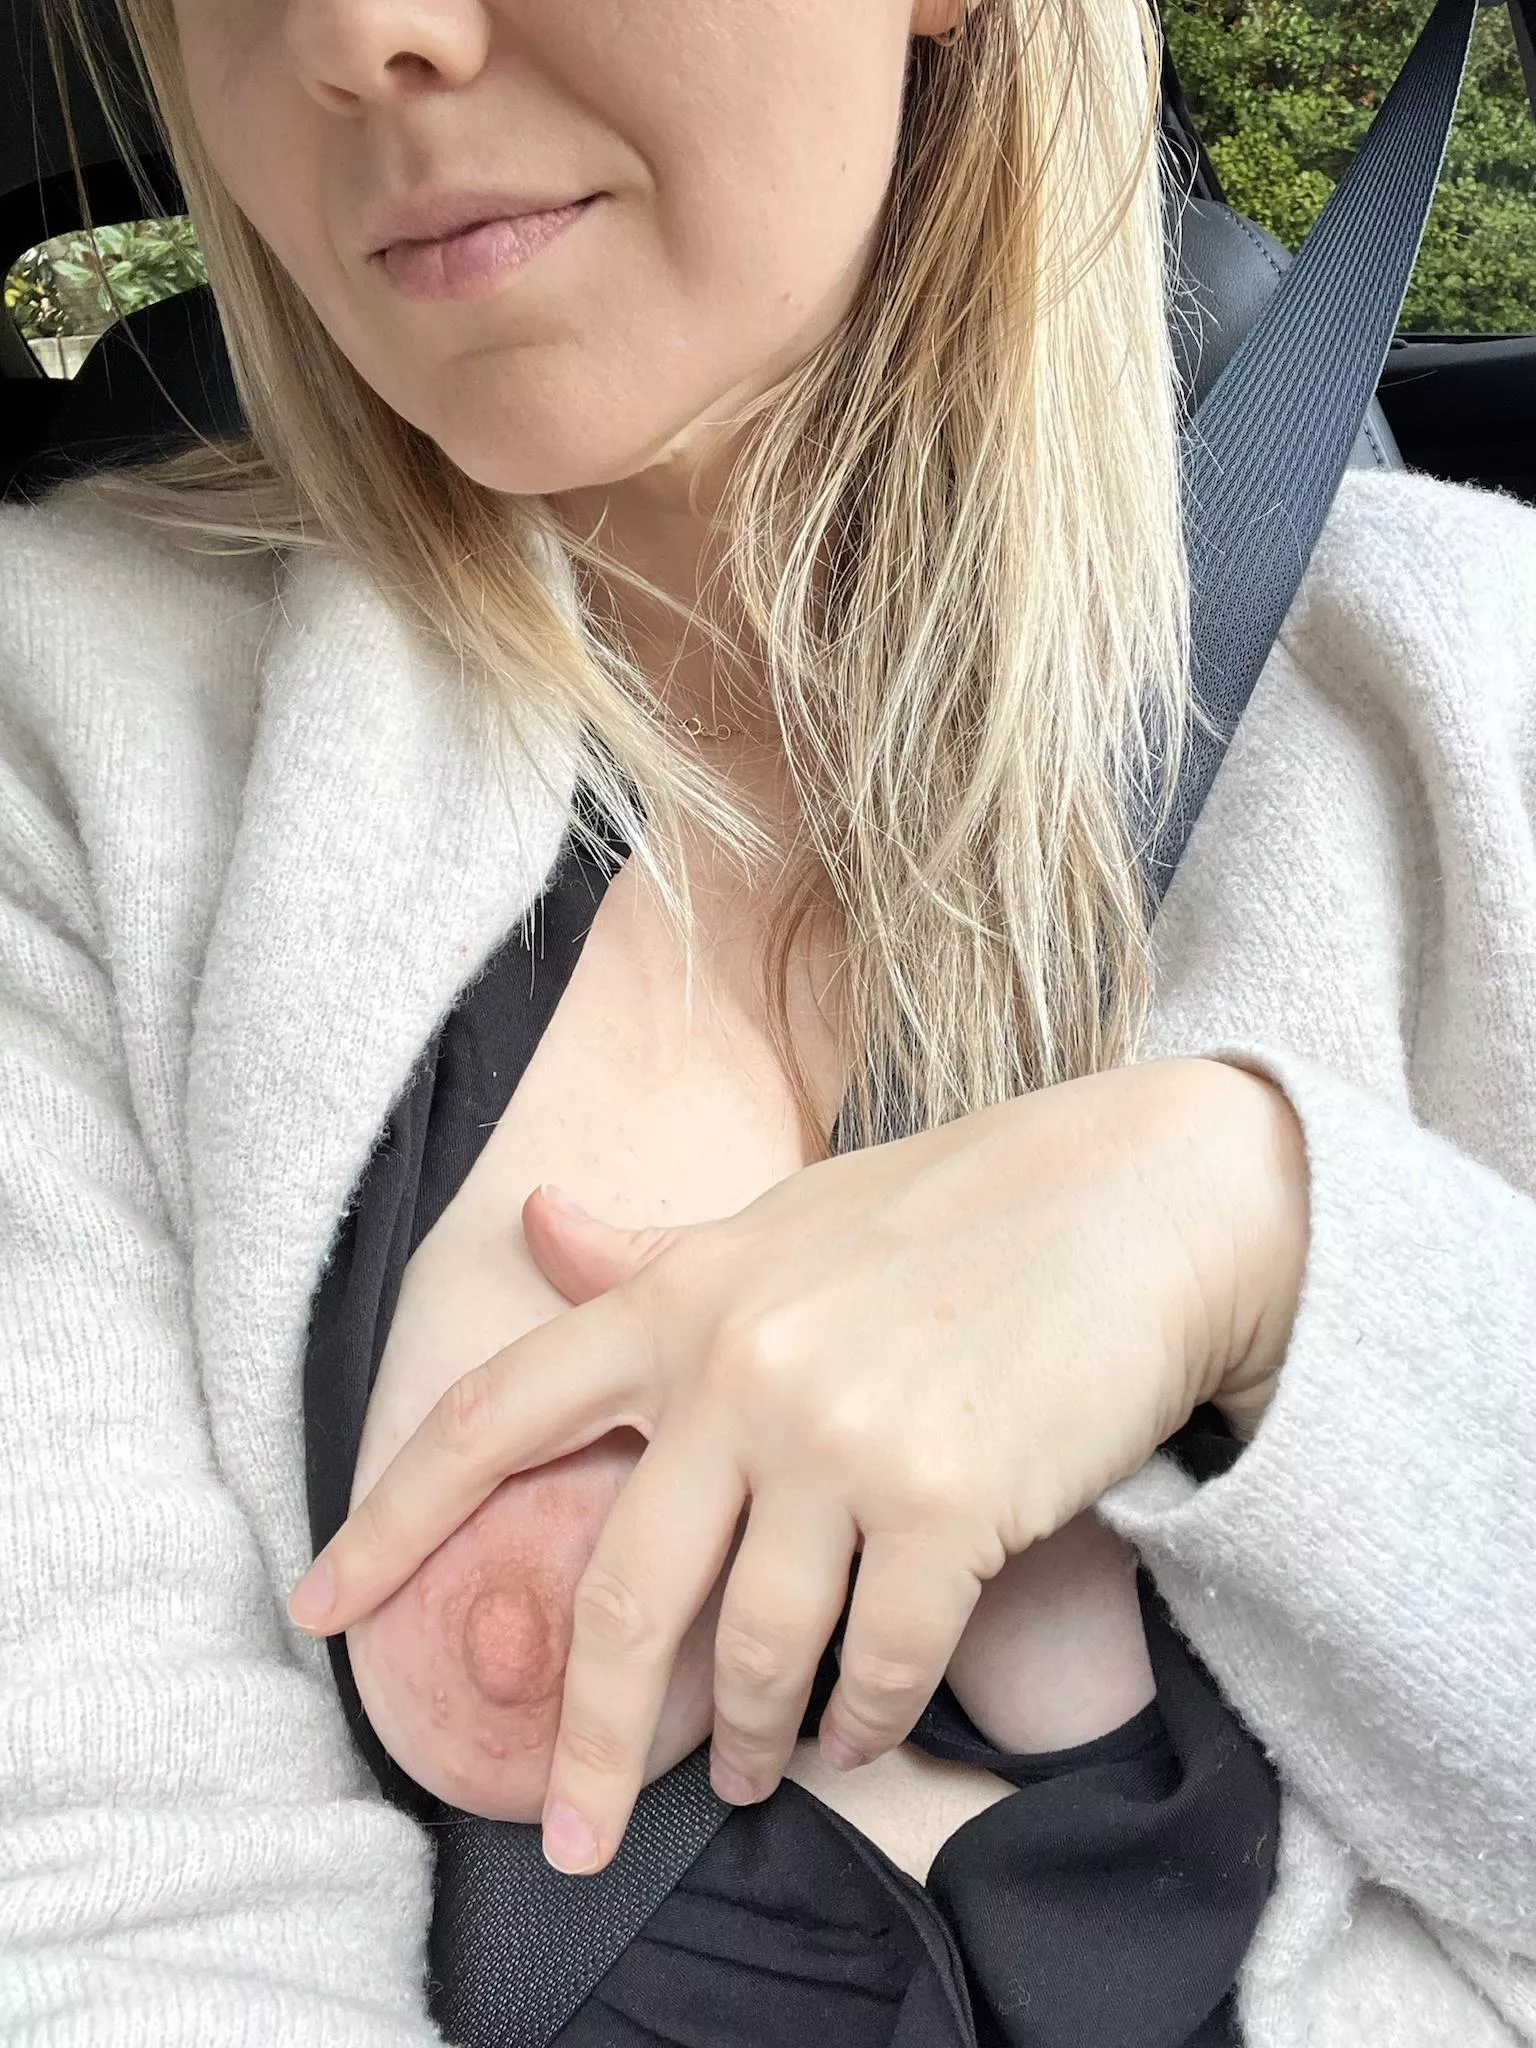 My Huge Nipples - Play with my huge nipples while I drive nudes : Nipples | NUDE-PICS.ORG